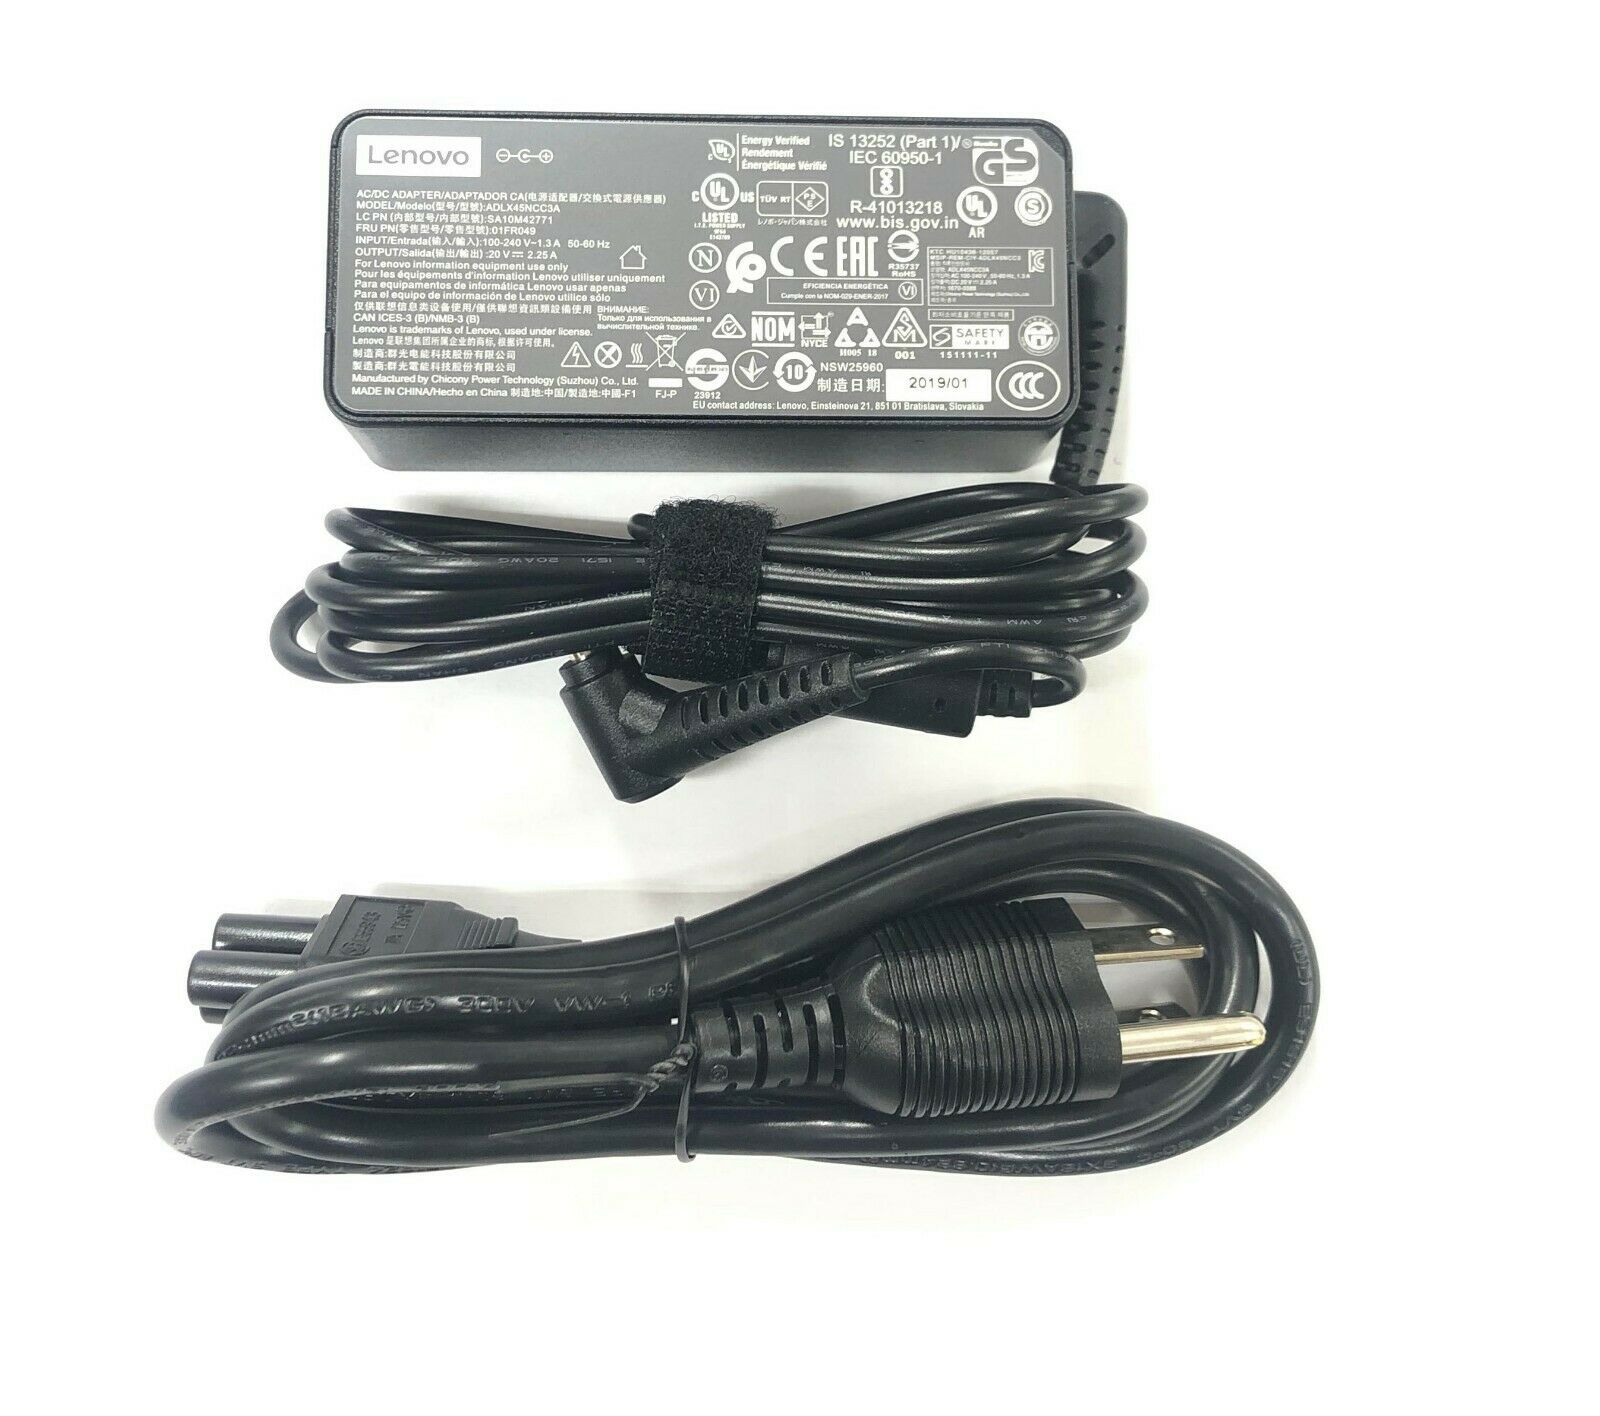 Lenovo Output Current: 2.25A Color: Black Type: AC/Standard UPC: Does not apply New Genuine Lenovo Ideapad 110-1